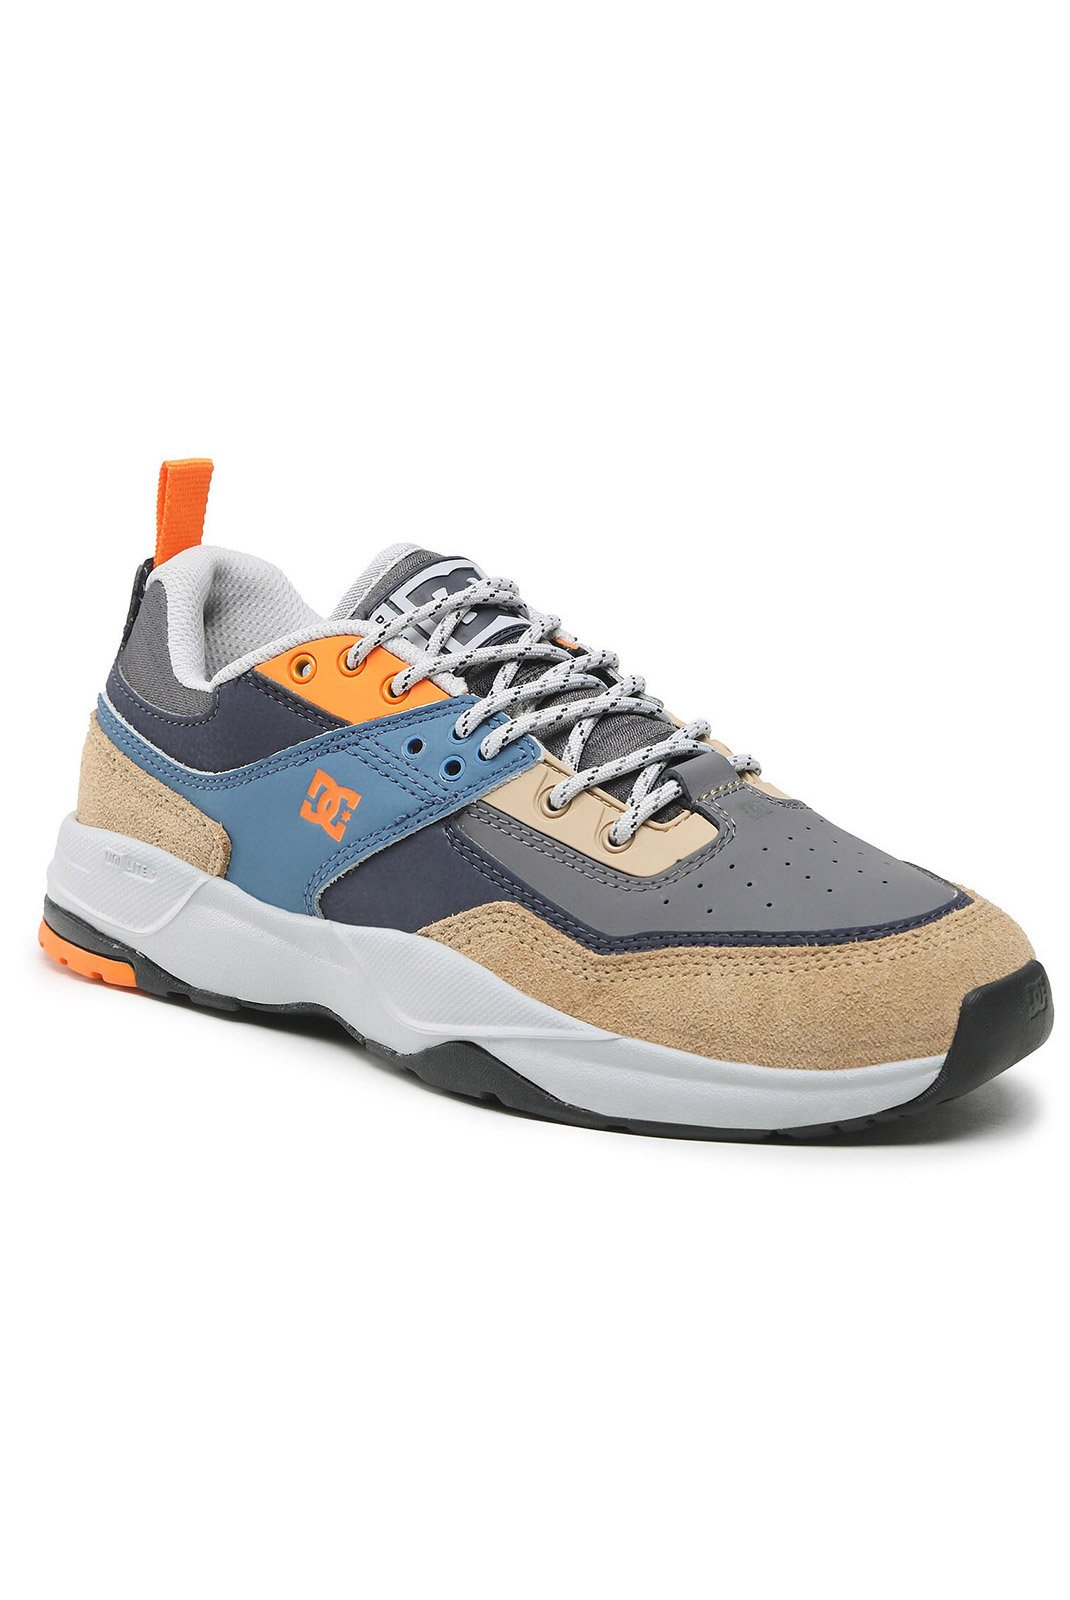 Sneakers / Sport  Dc shoes ADYS700142 XGCK